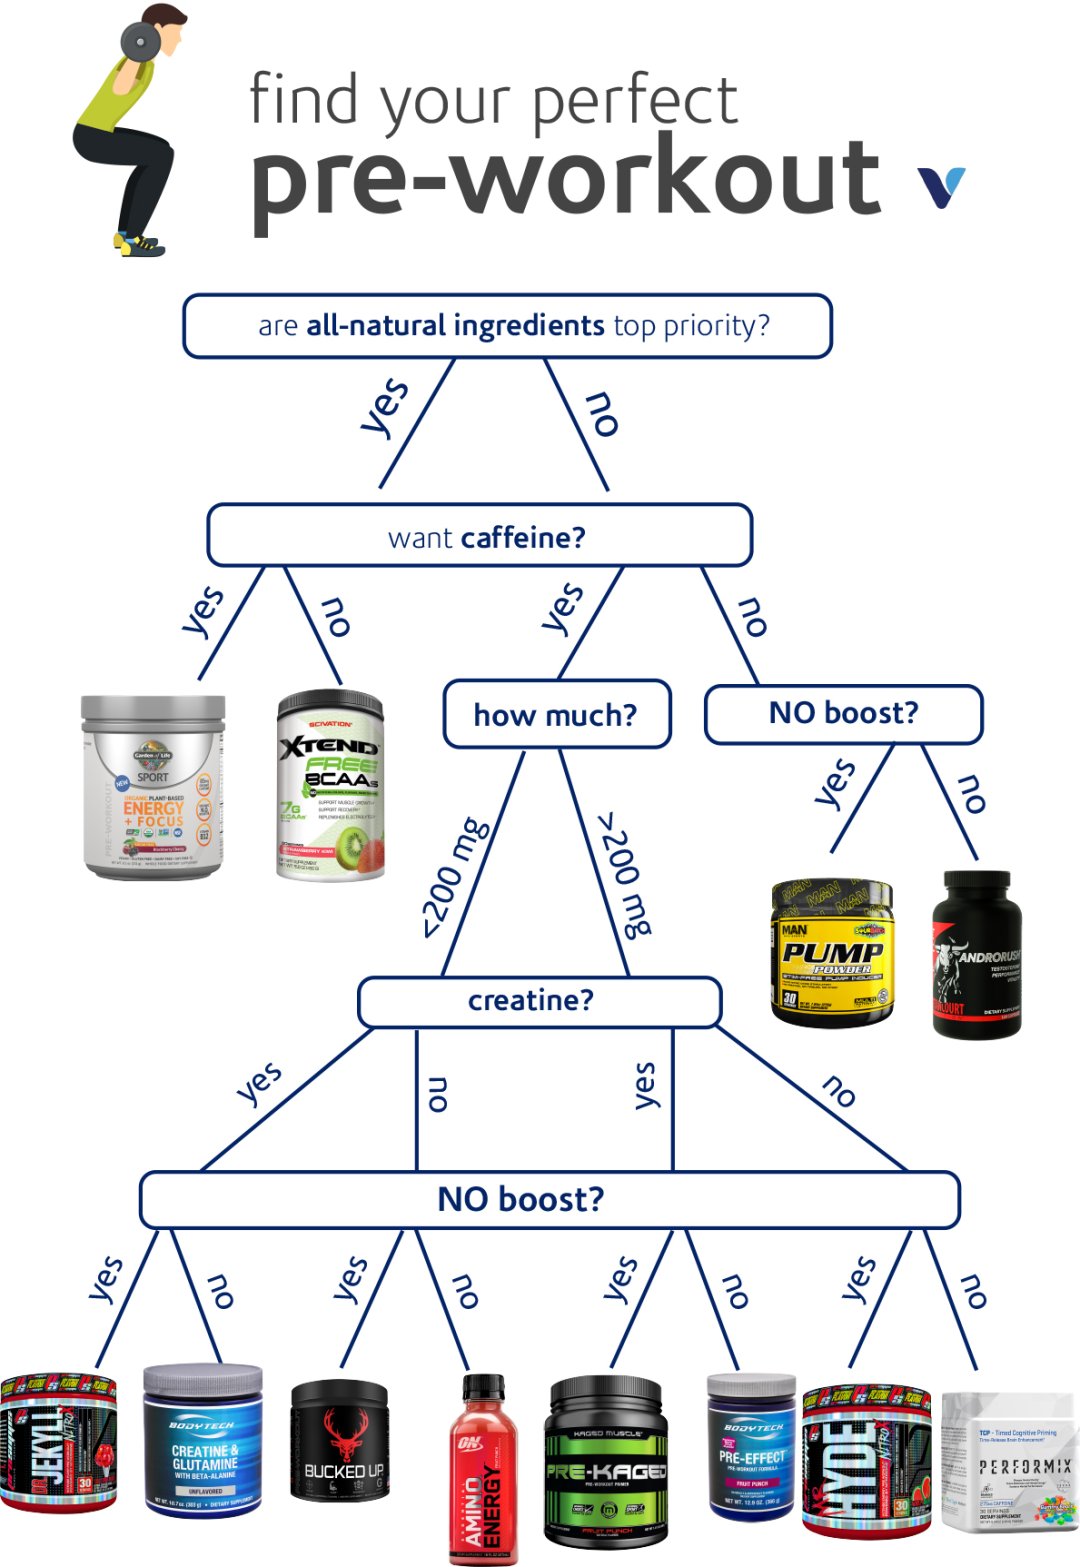 Use This Flow Chart To Find Your Perfect Pre-Workout